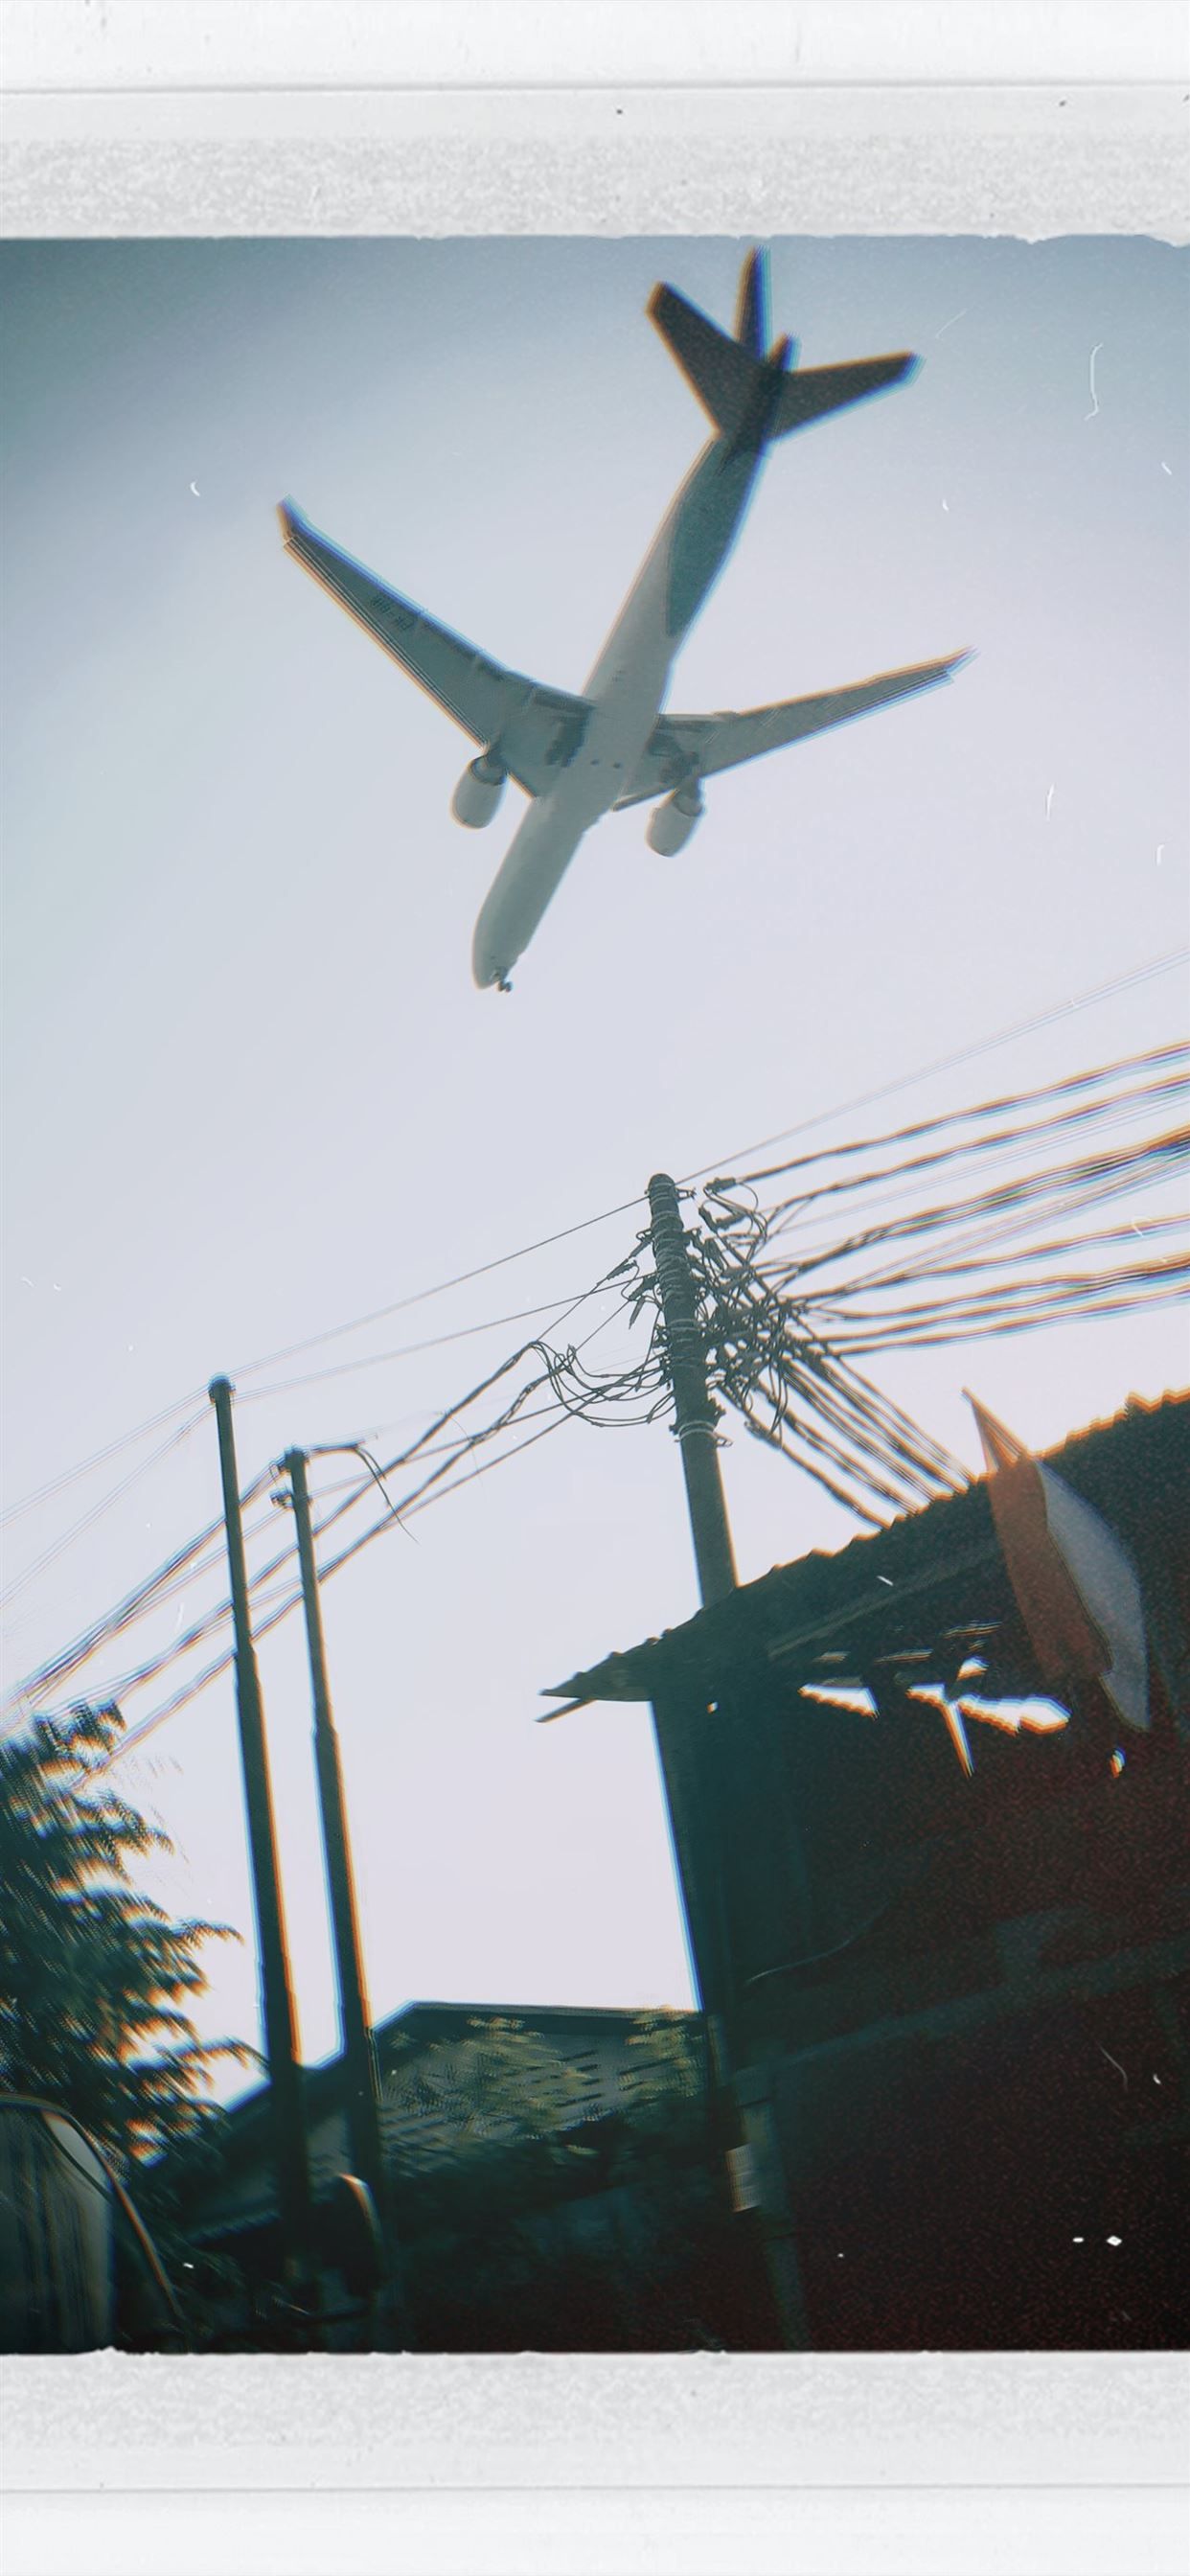 A plane flying over some buildings and power lines - Travel